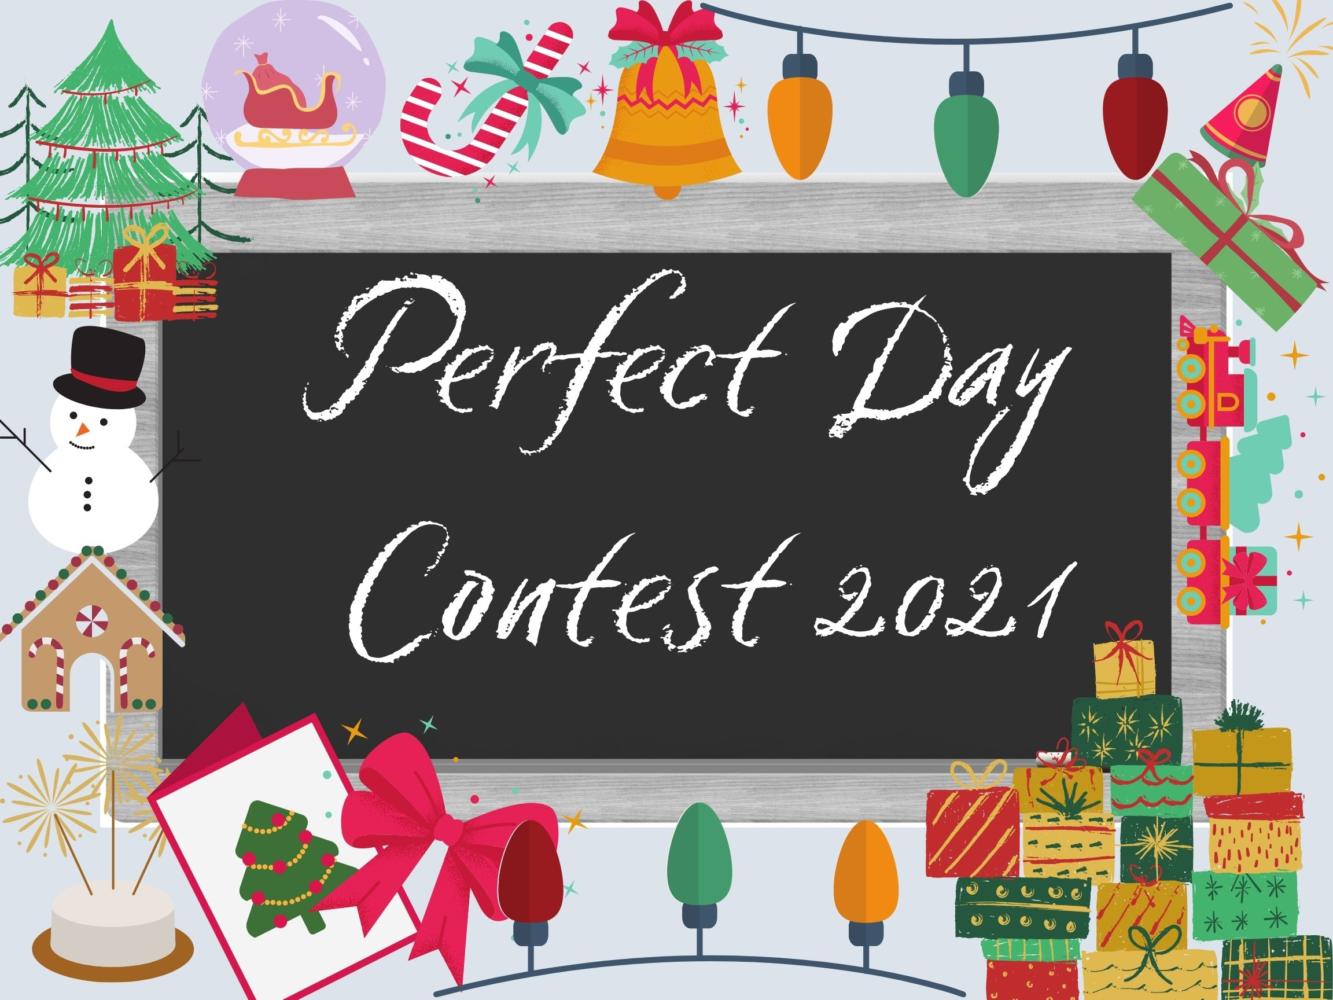 Perfect Day Contest 2021